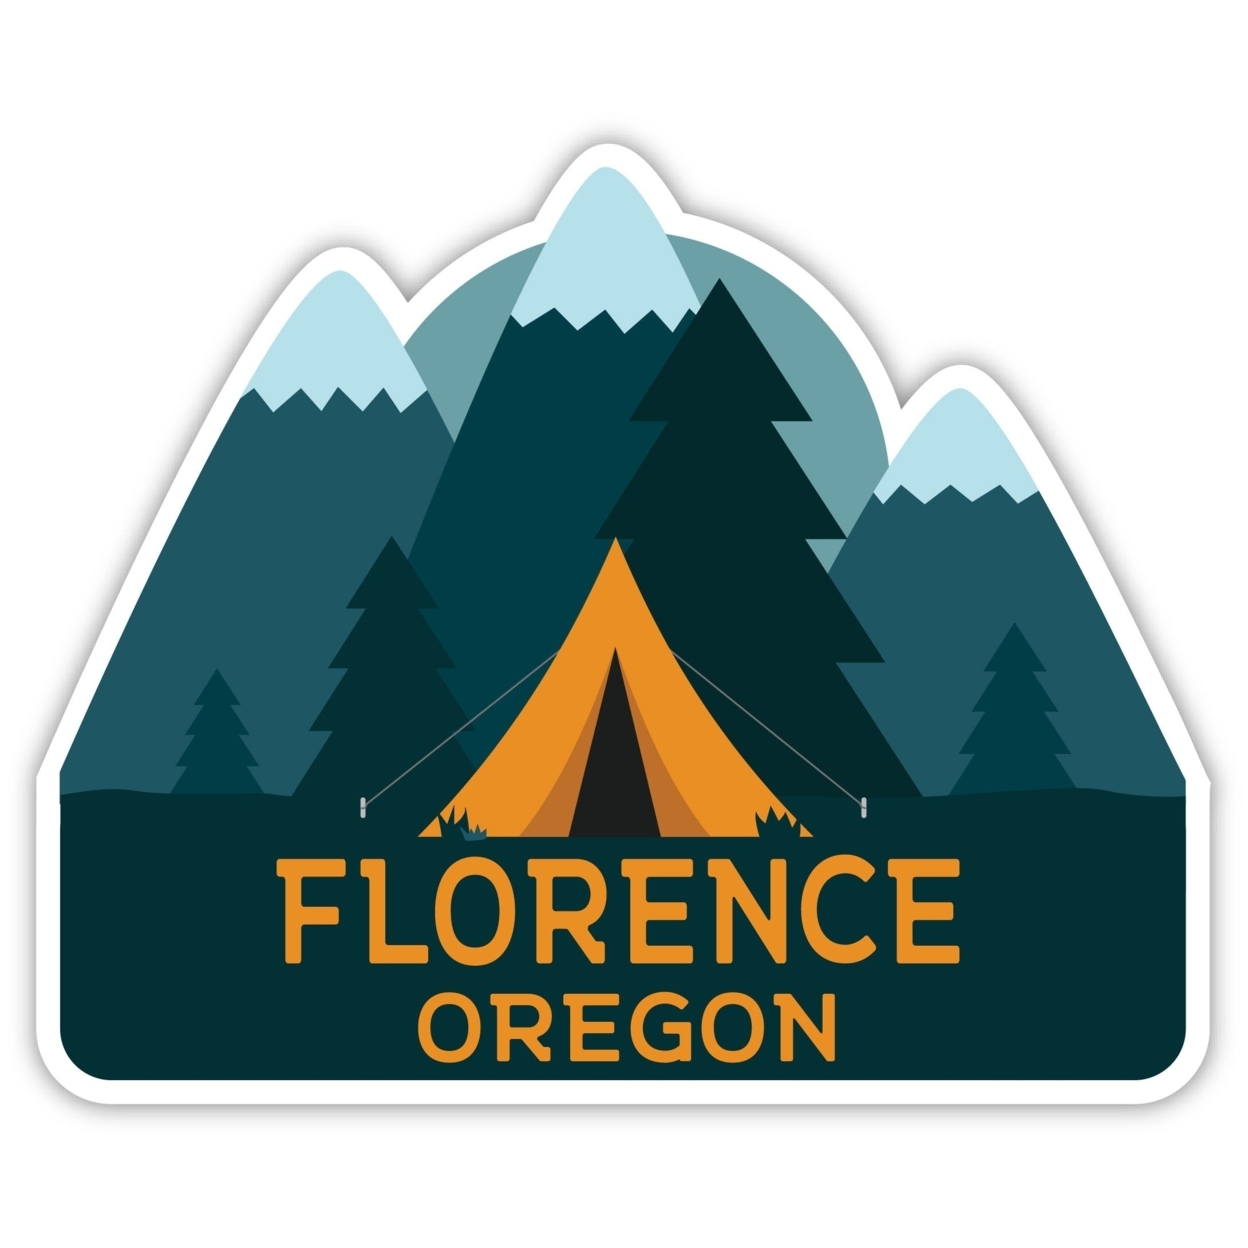 Florence Oregon Souvenir Decorative Stickers (Choose Theme And Size) - 4-Pack, 4-Inch, Camp Life